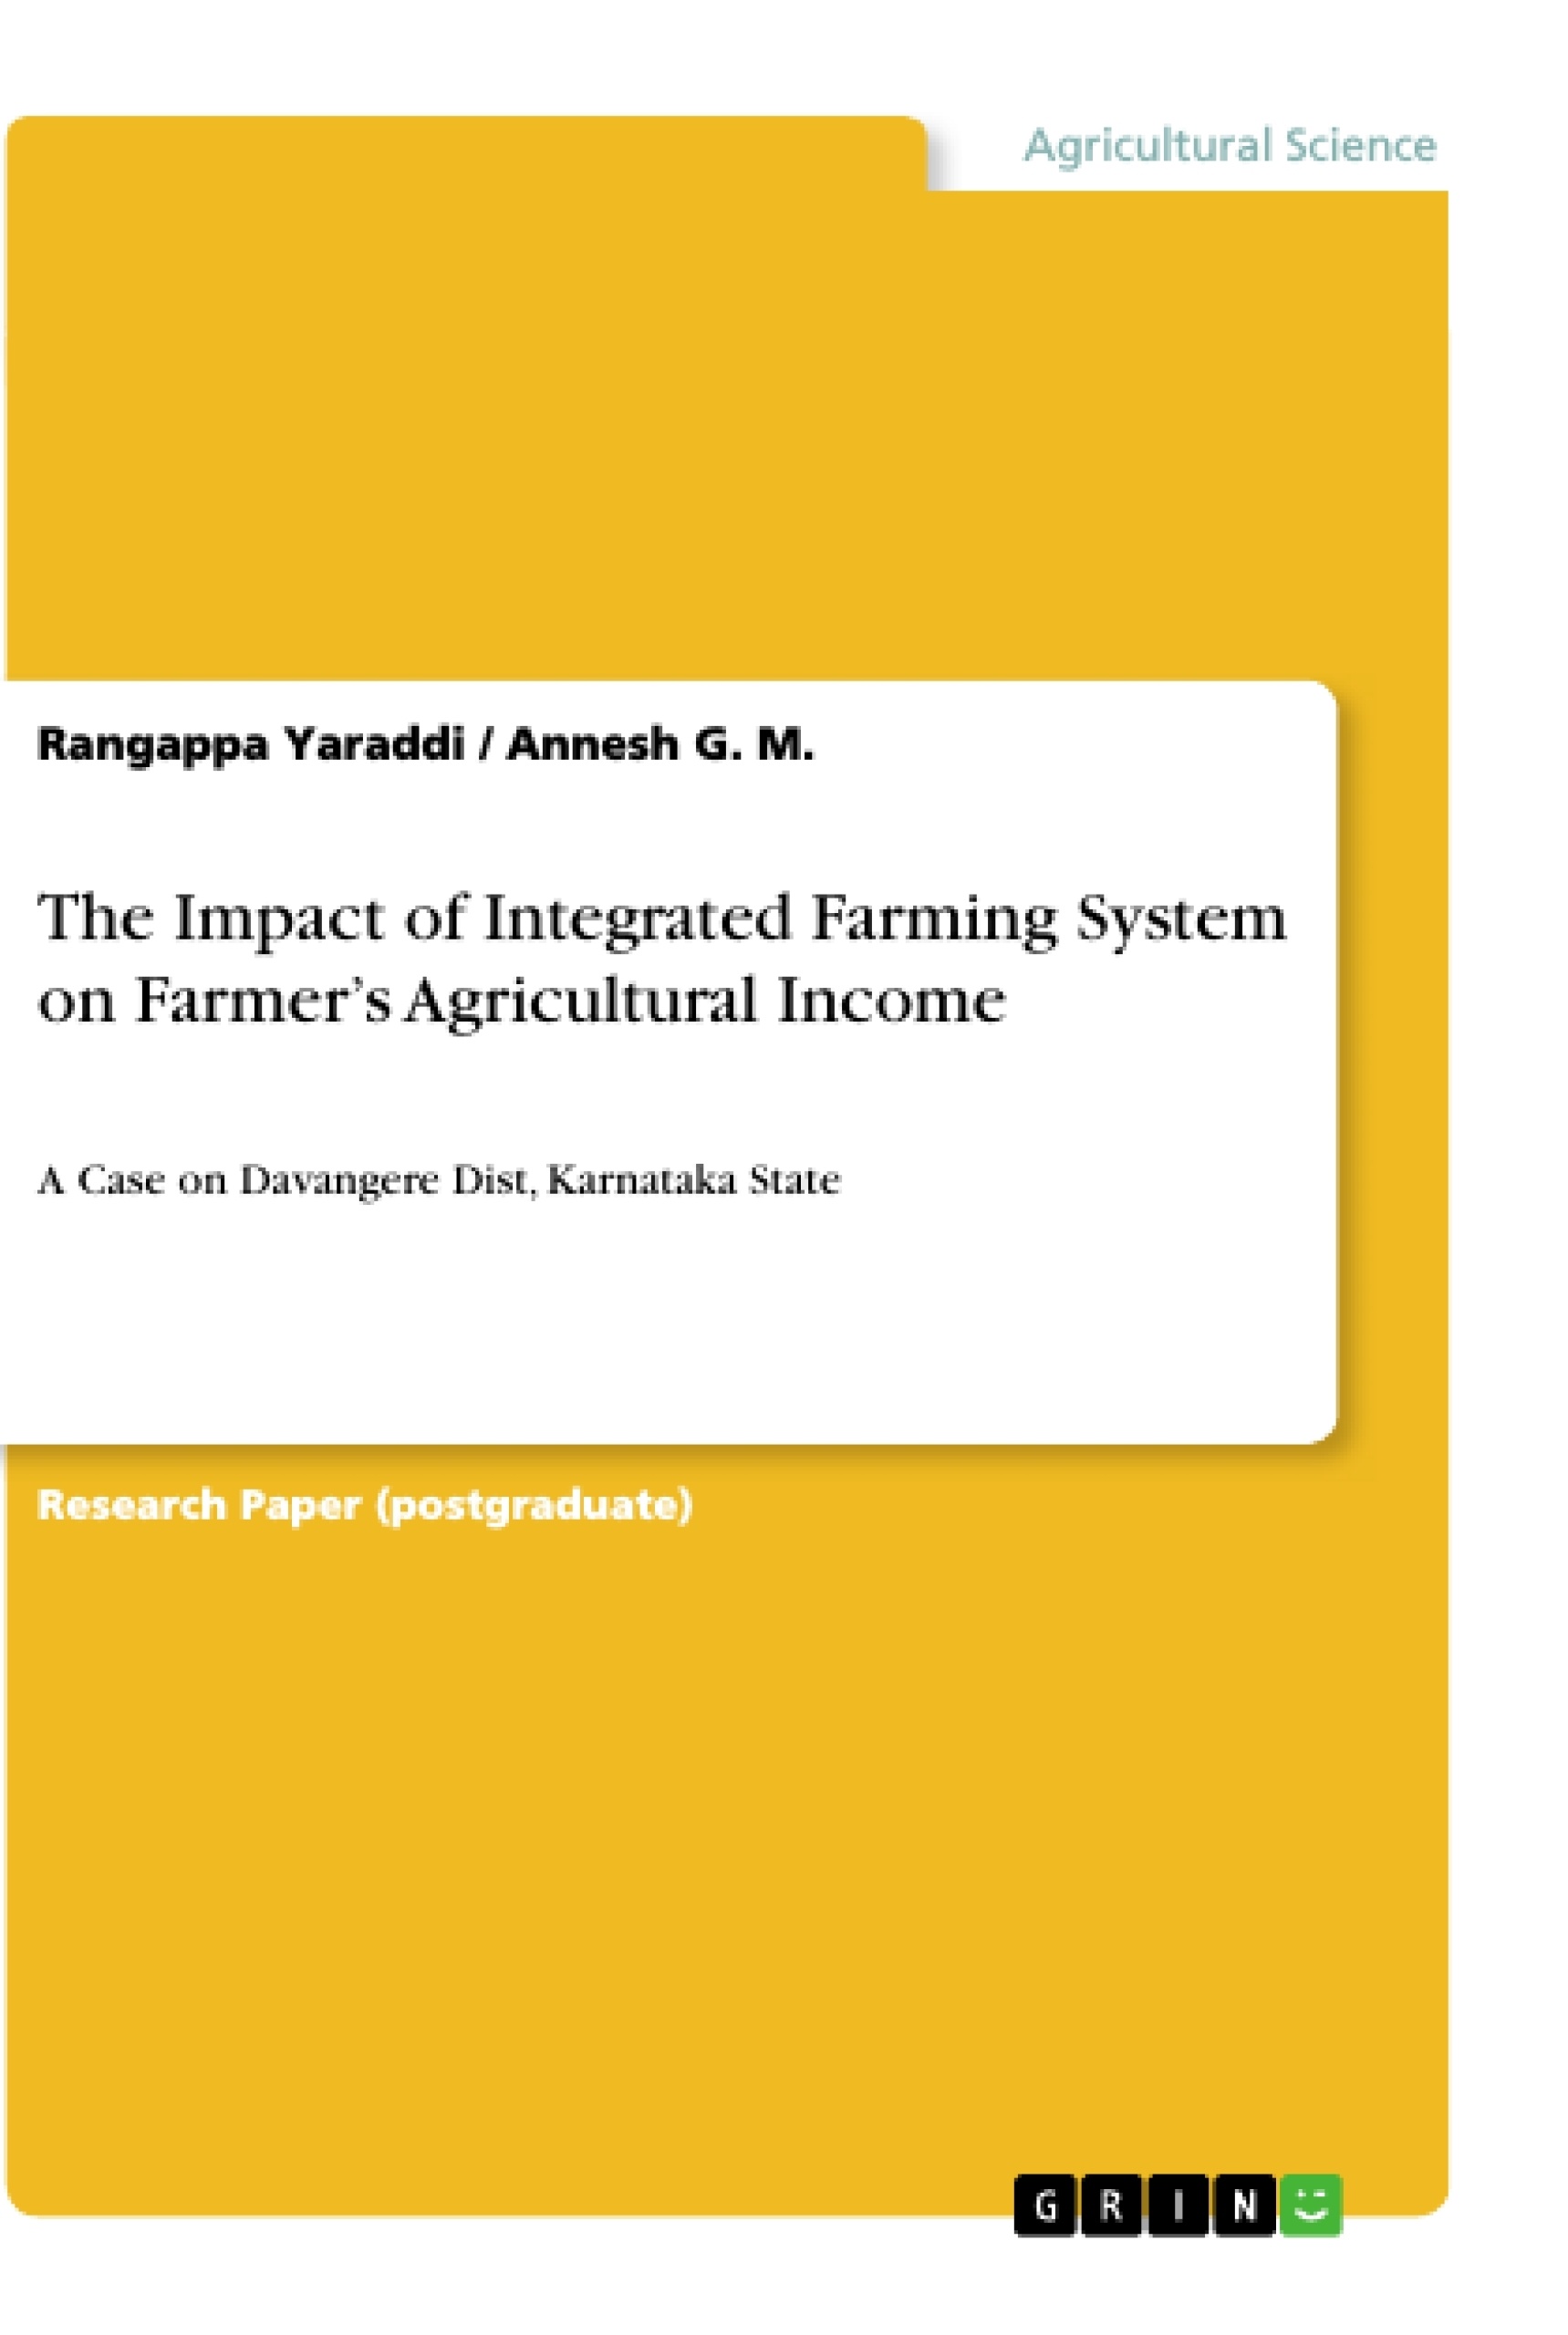 Title: The Impact of Integrated Farming System on Farmer’s Agricultural Income